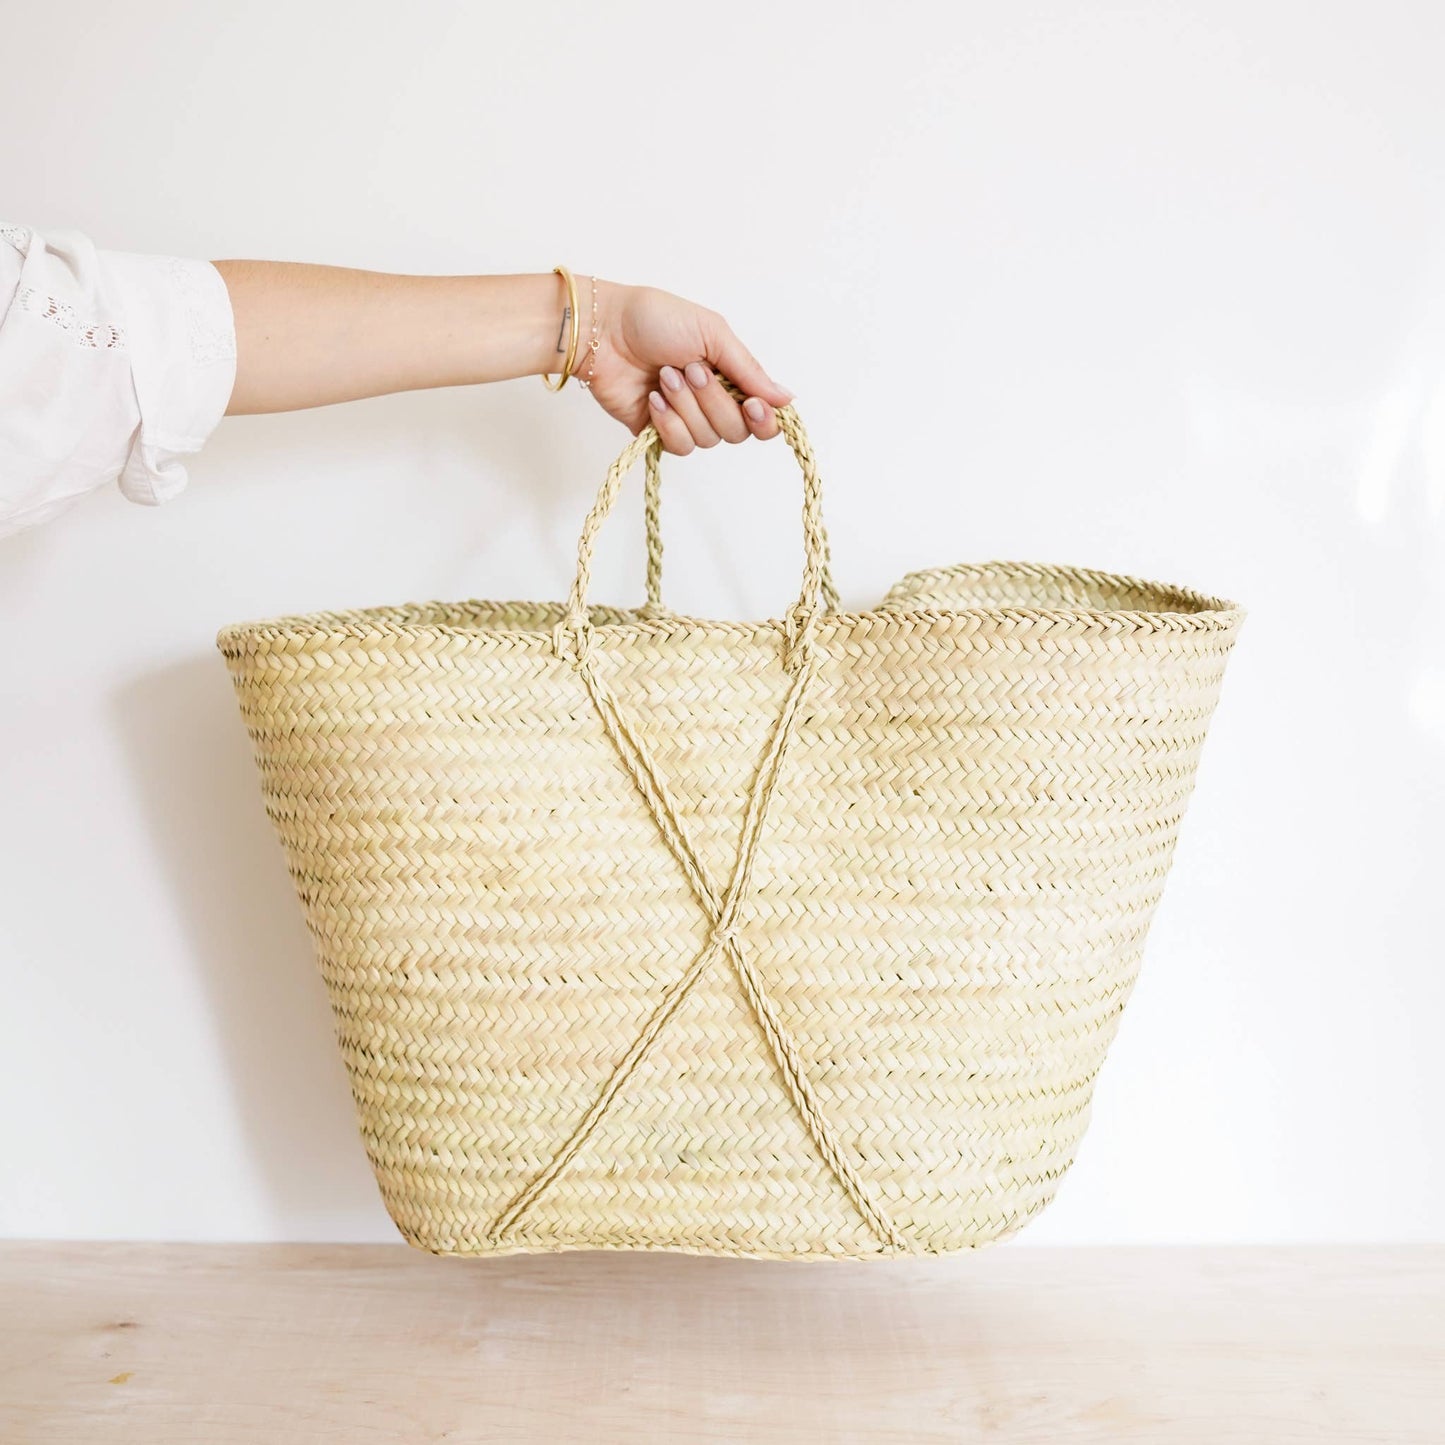 SOCCO Designs - Provence French Basket Large - Straw Bag made in Morocco